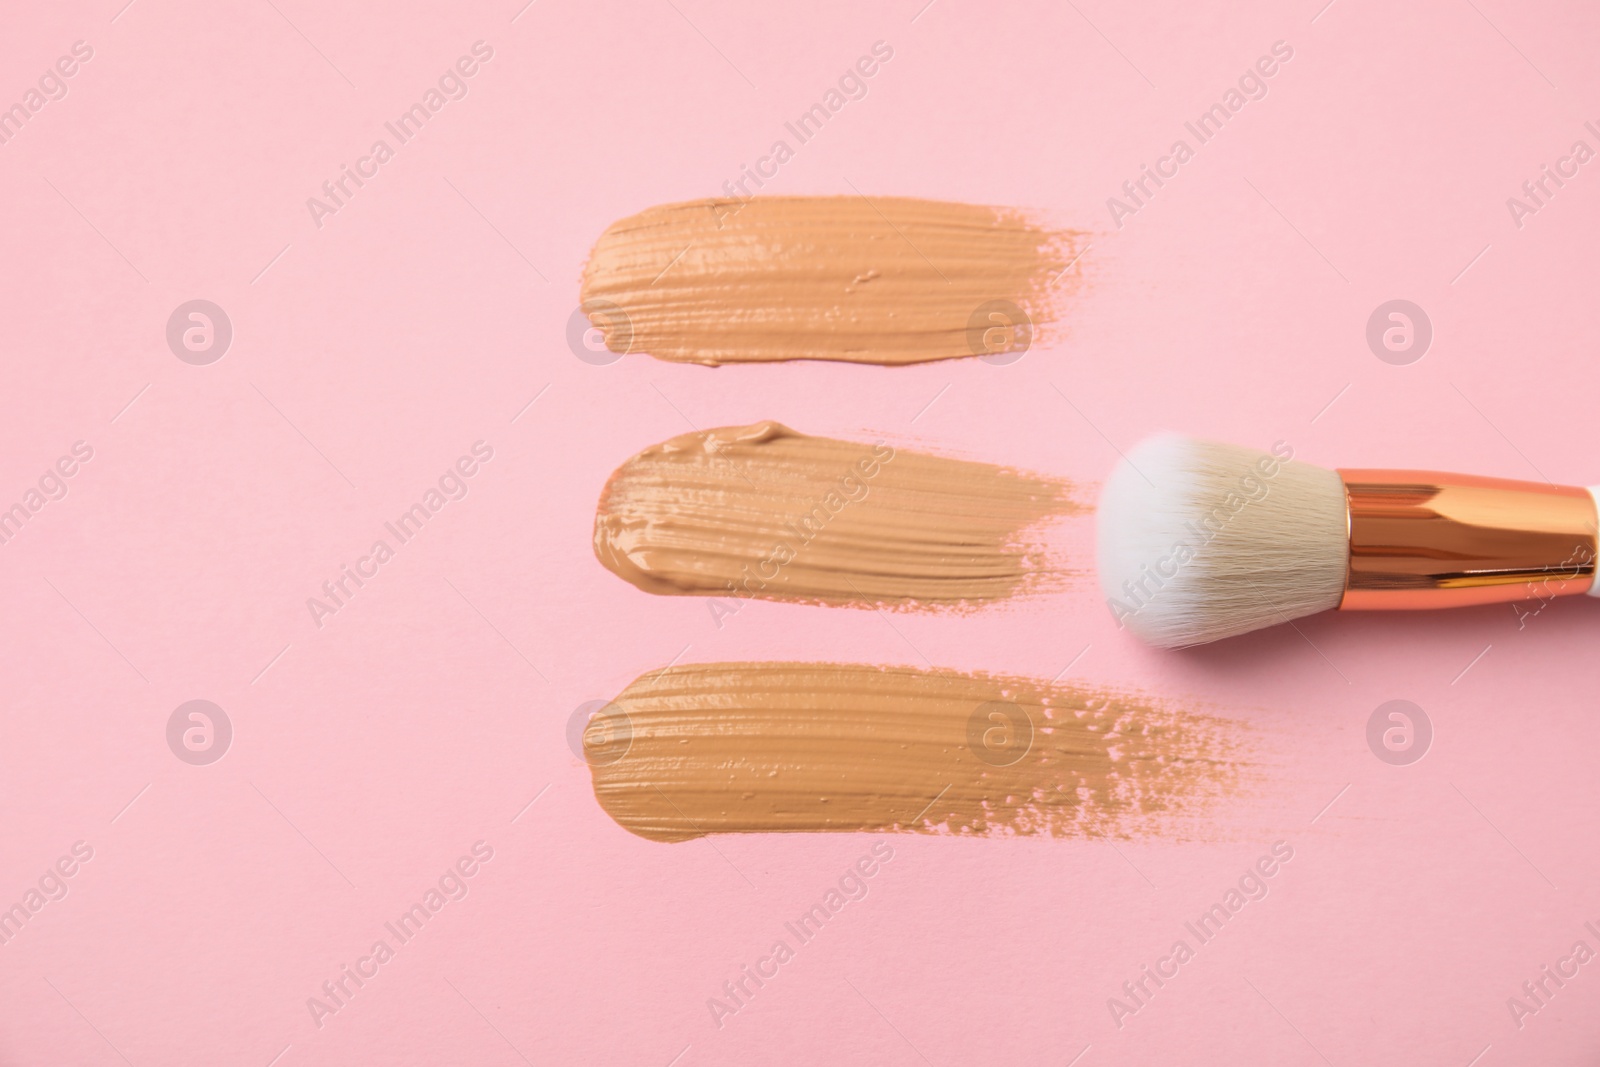 Photo of Samples of different foundation shades and makeup brush on pink background, above view